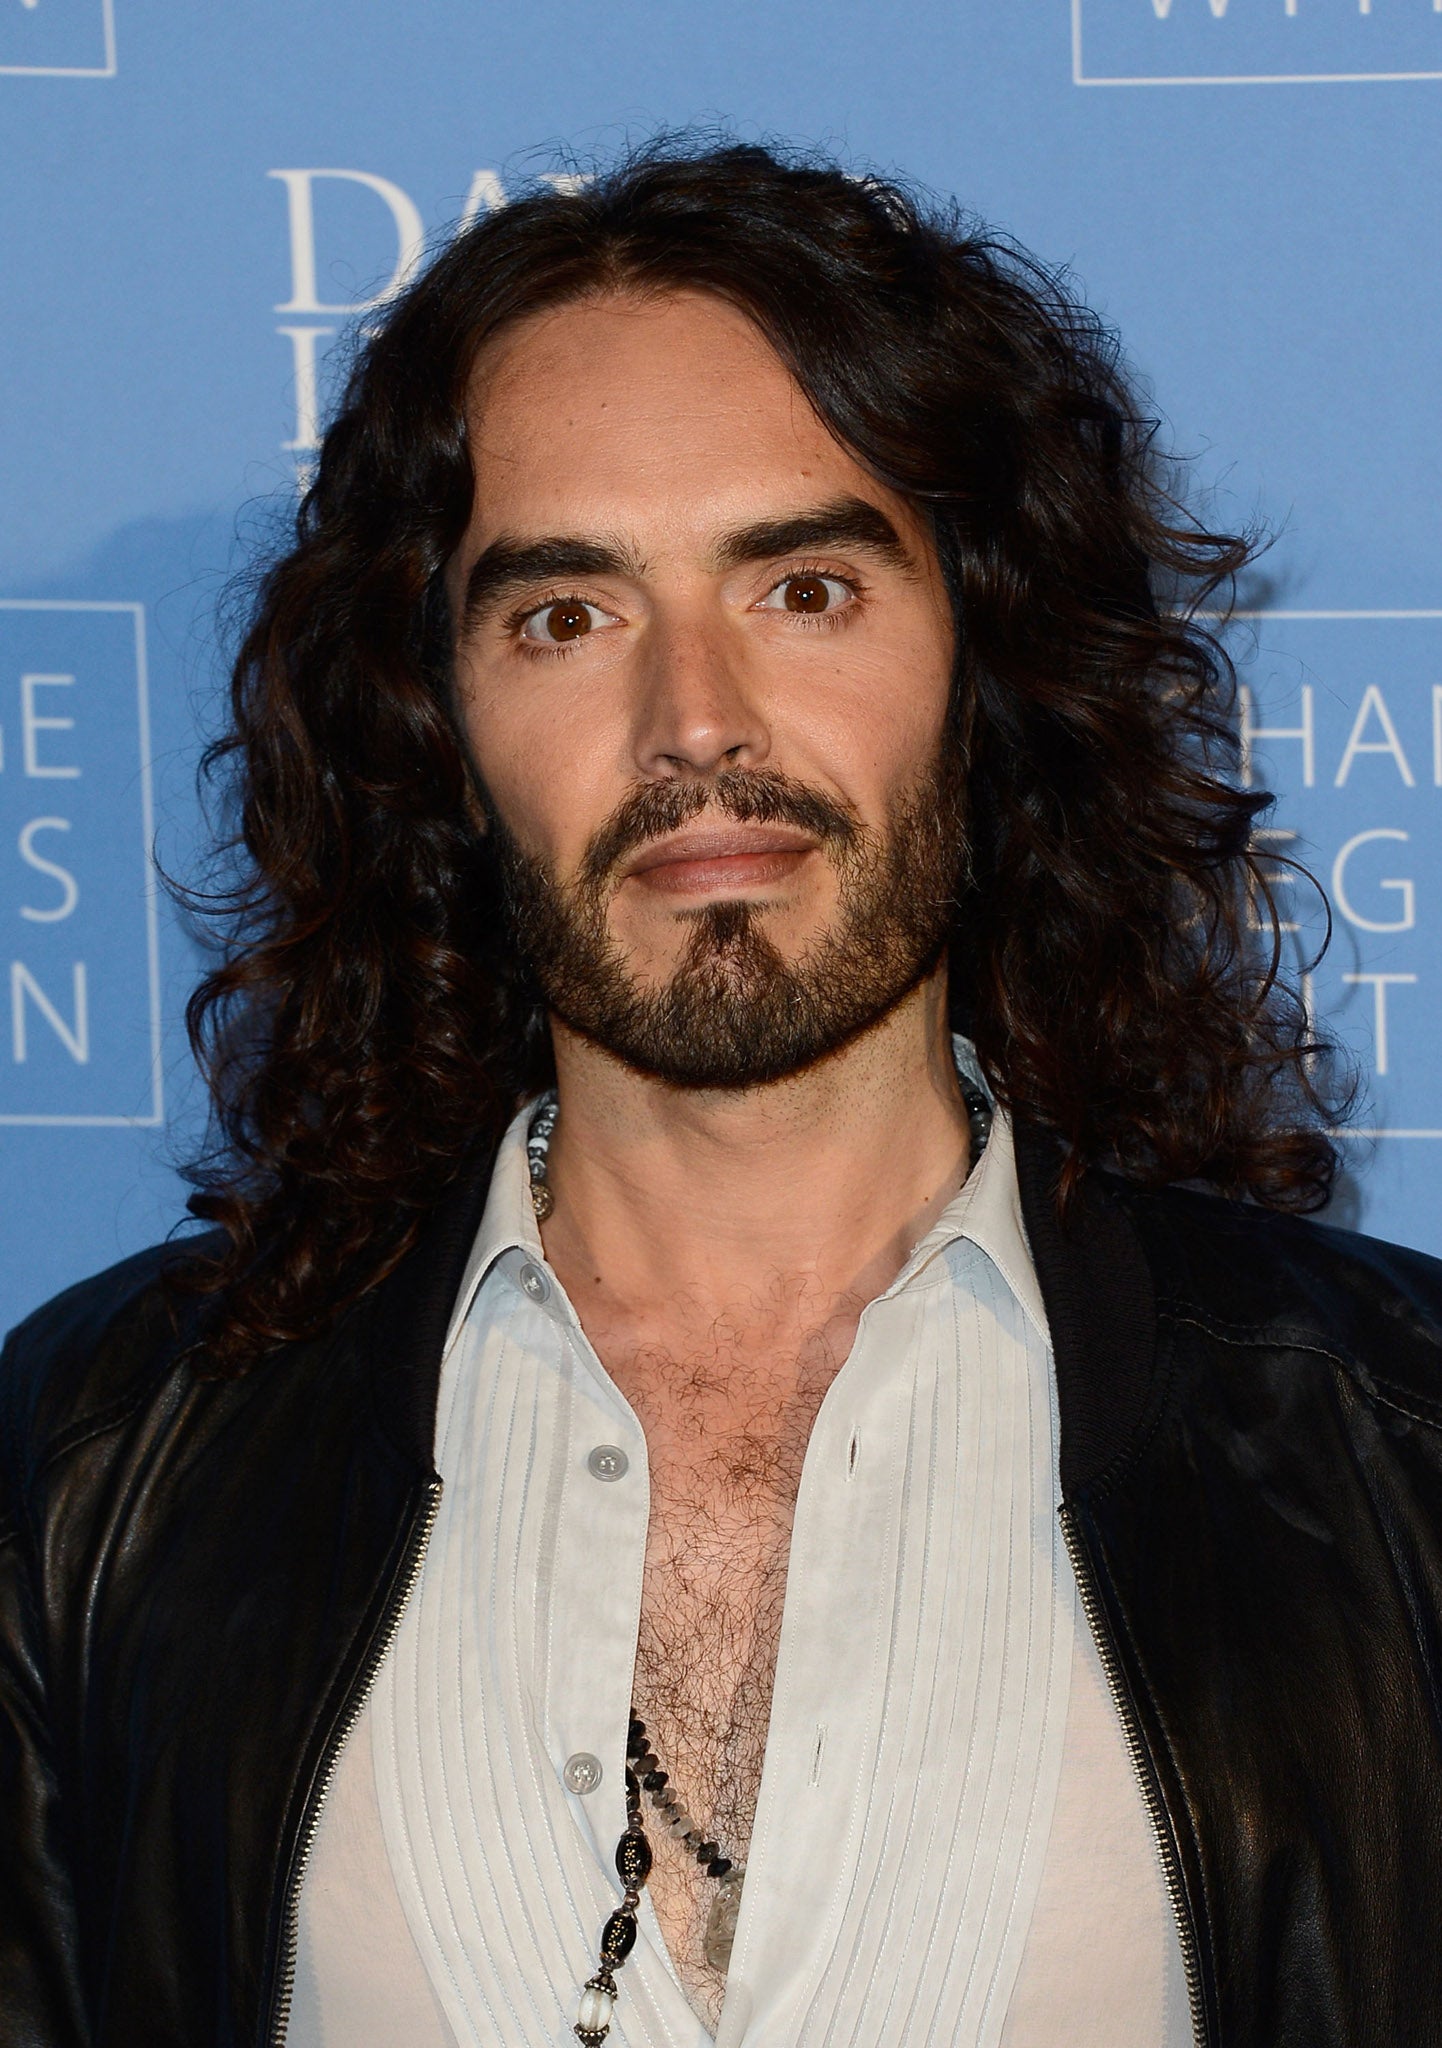 Russell Brand will not perform his new show The Messiah Complex at mosques in the Middle East after safety concerns were raised